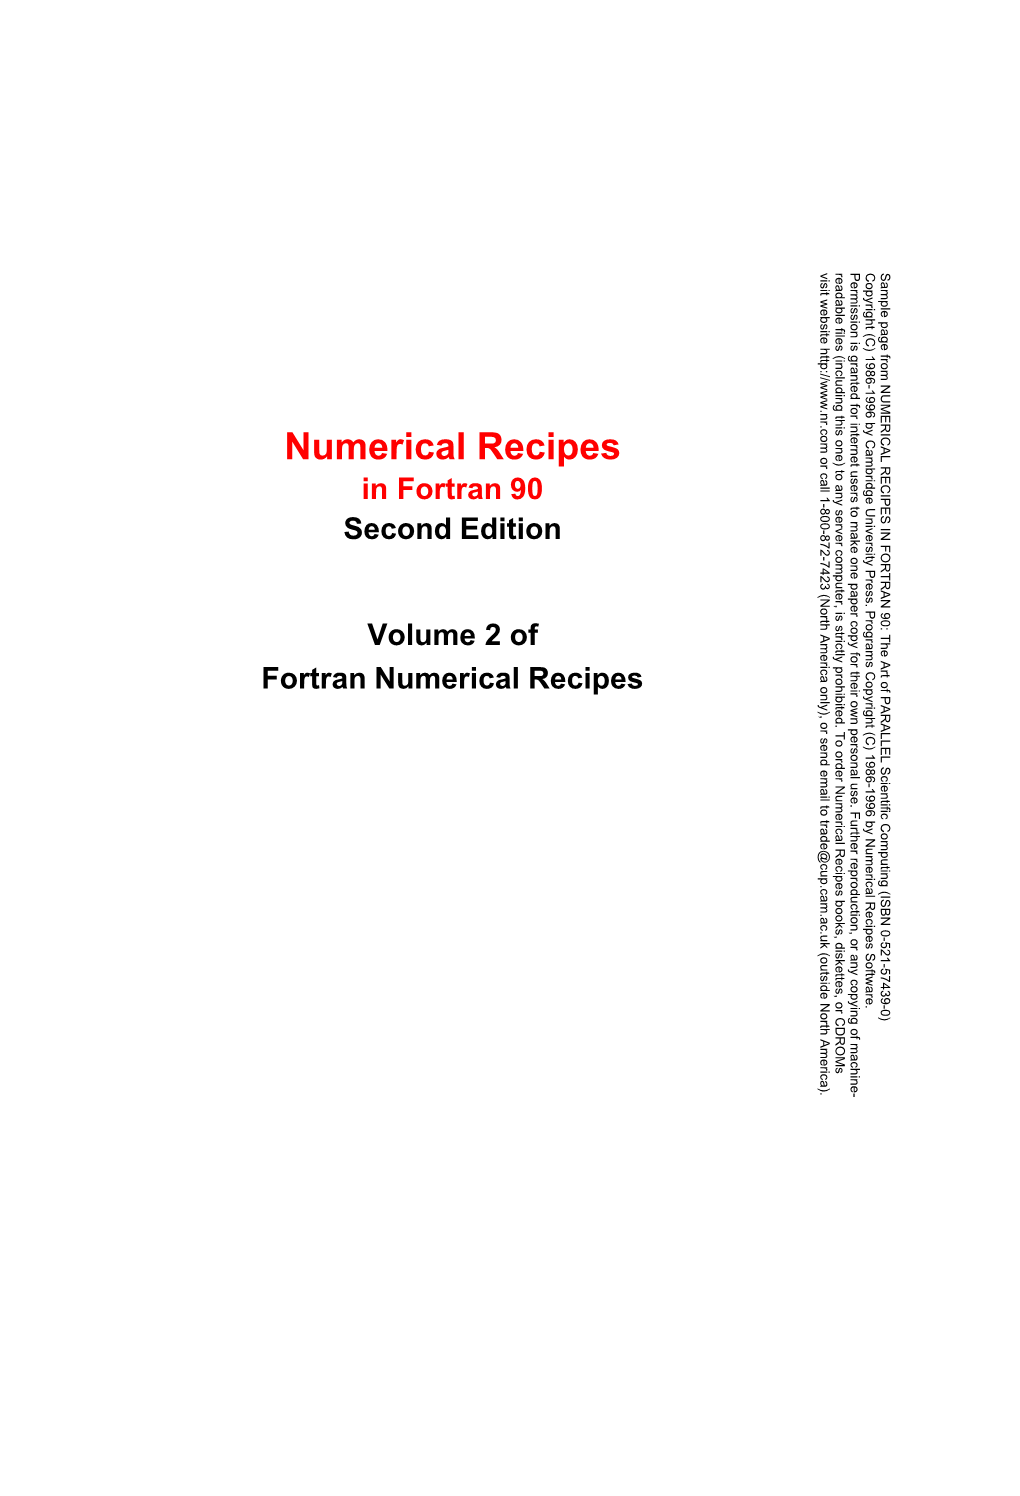 NUMERICAL RECIPES in FORTRAN 90: the Art of PARALLEL Scientific Computing (ISBN 0-521-57439-0) Copyright (C) 1986-1996 by Cambridge University Press